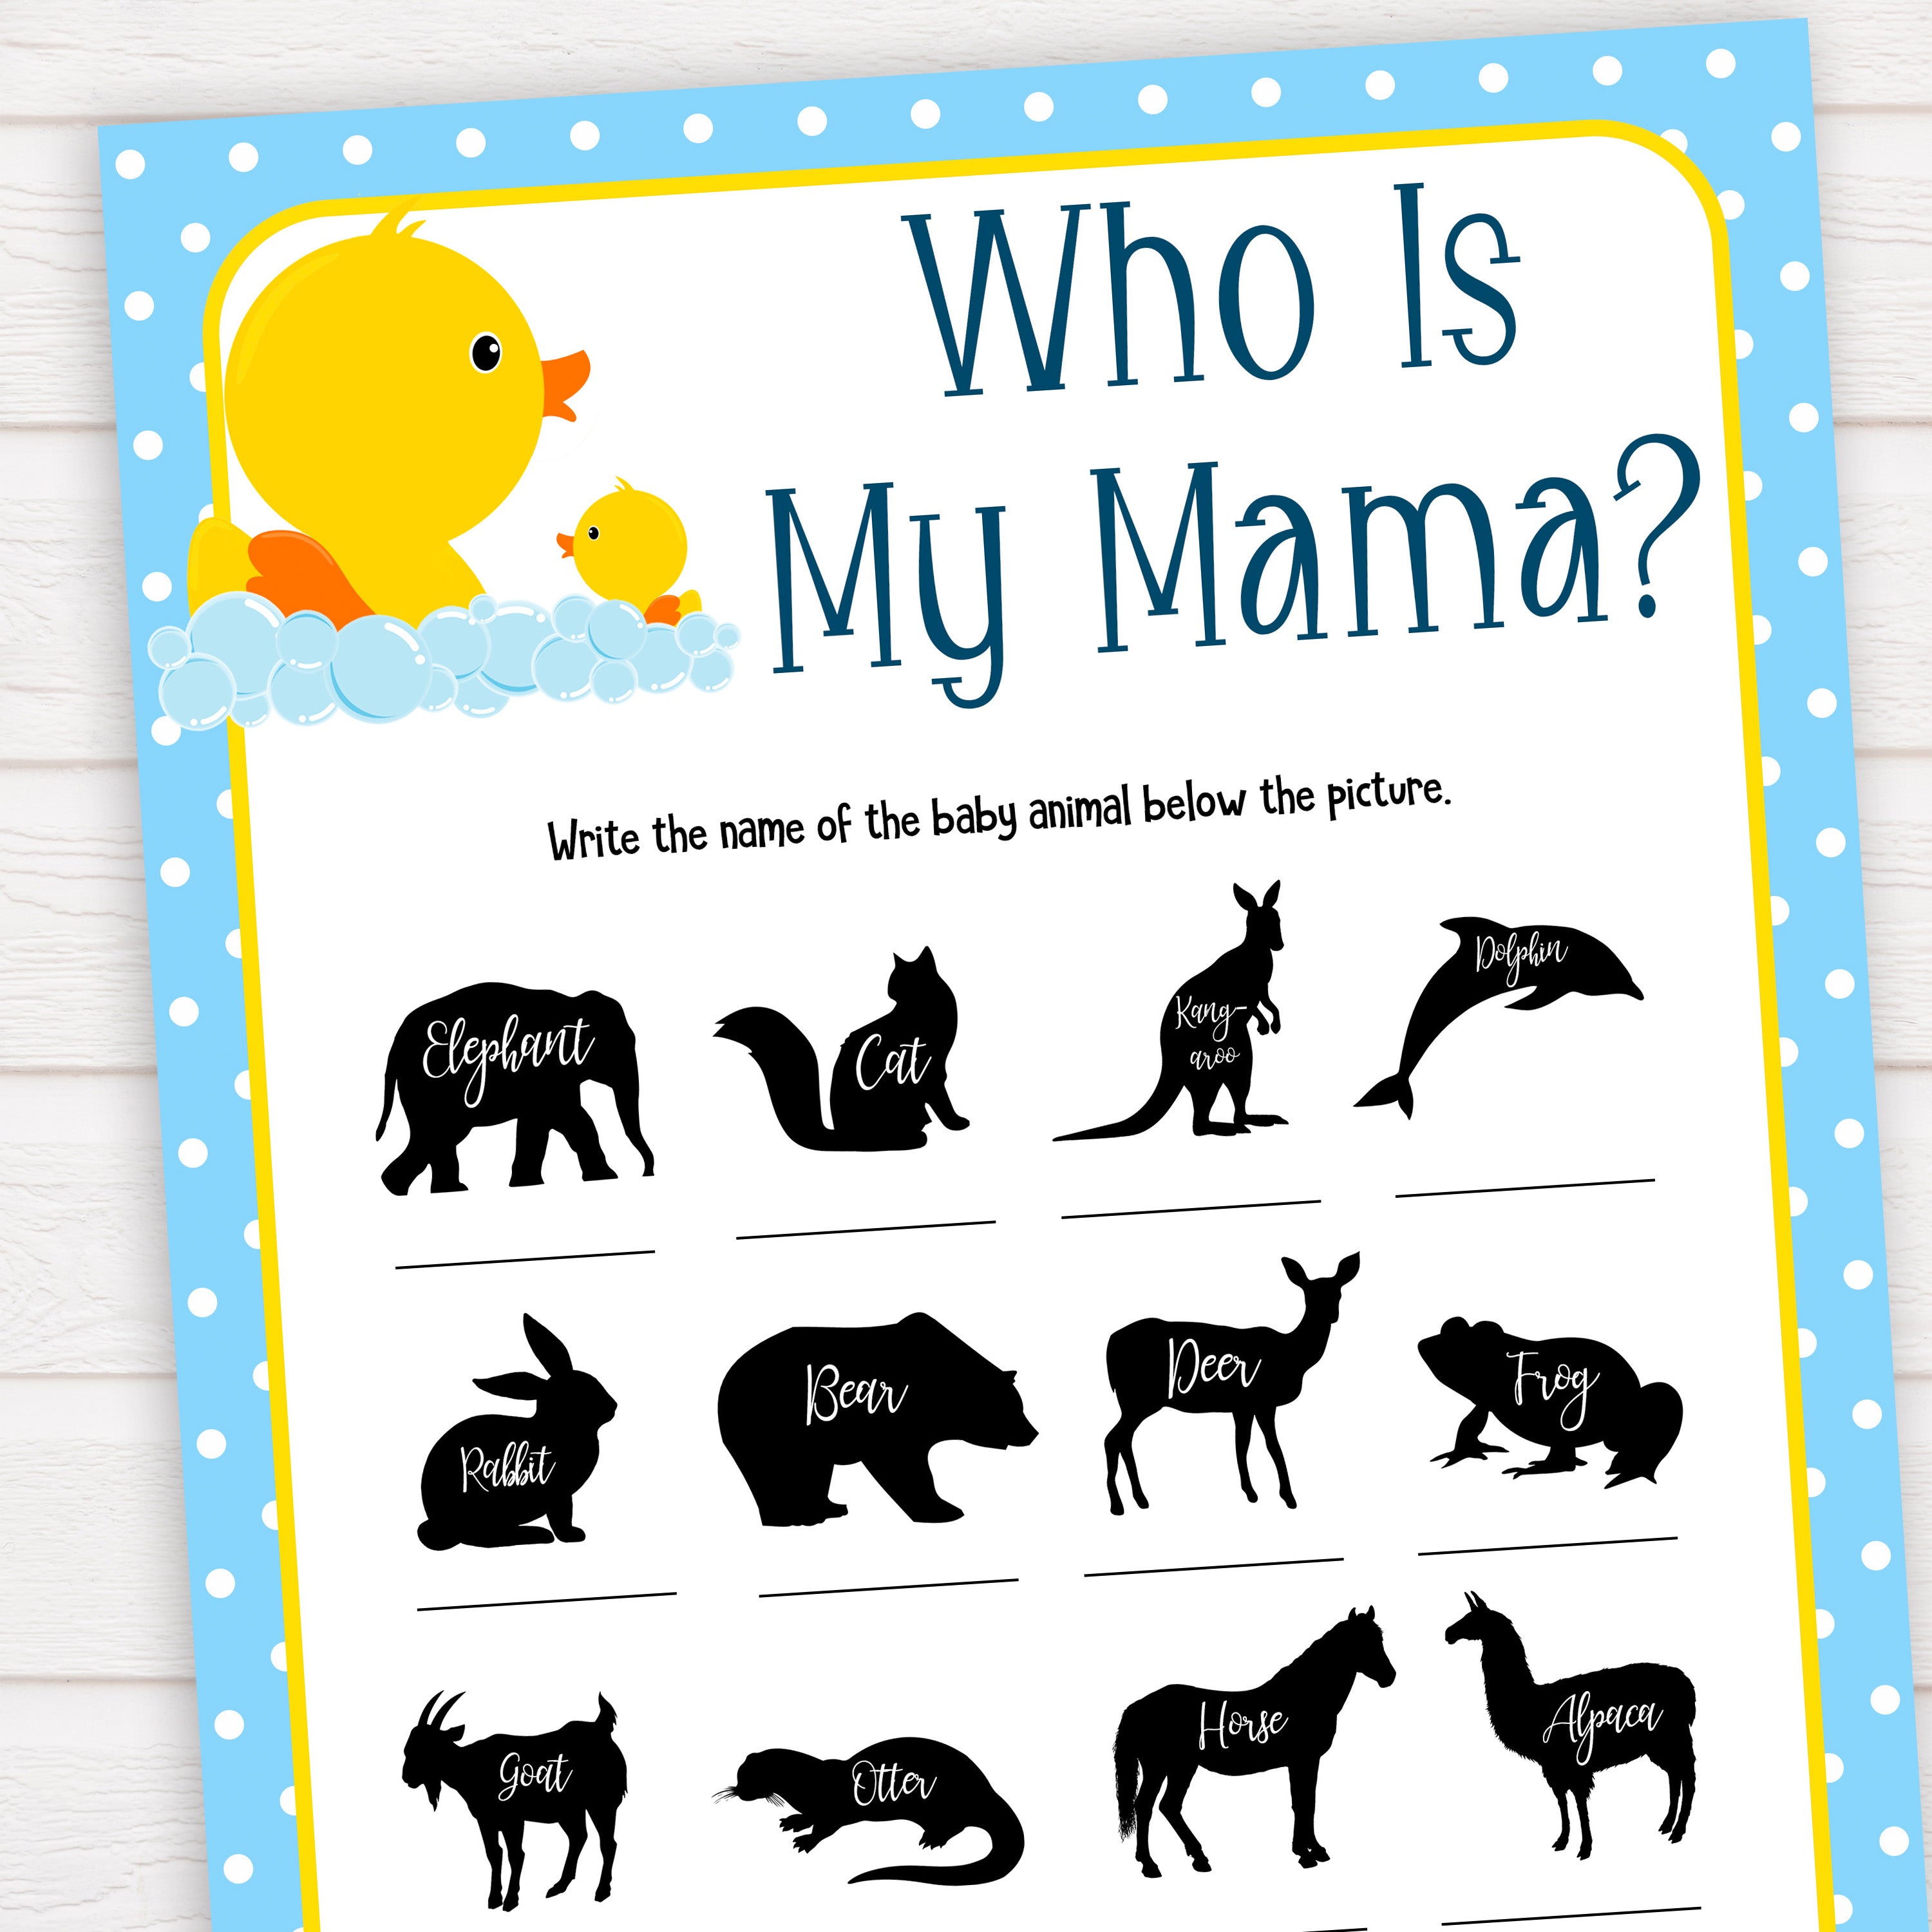 rubber ducky baby games, who is my mama baby game, printable baby games, baby shower games, rubber ducky baby theme, fun baby games, popular baby games